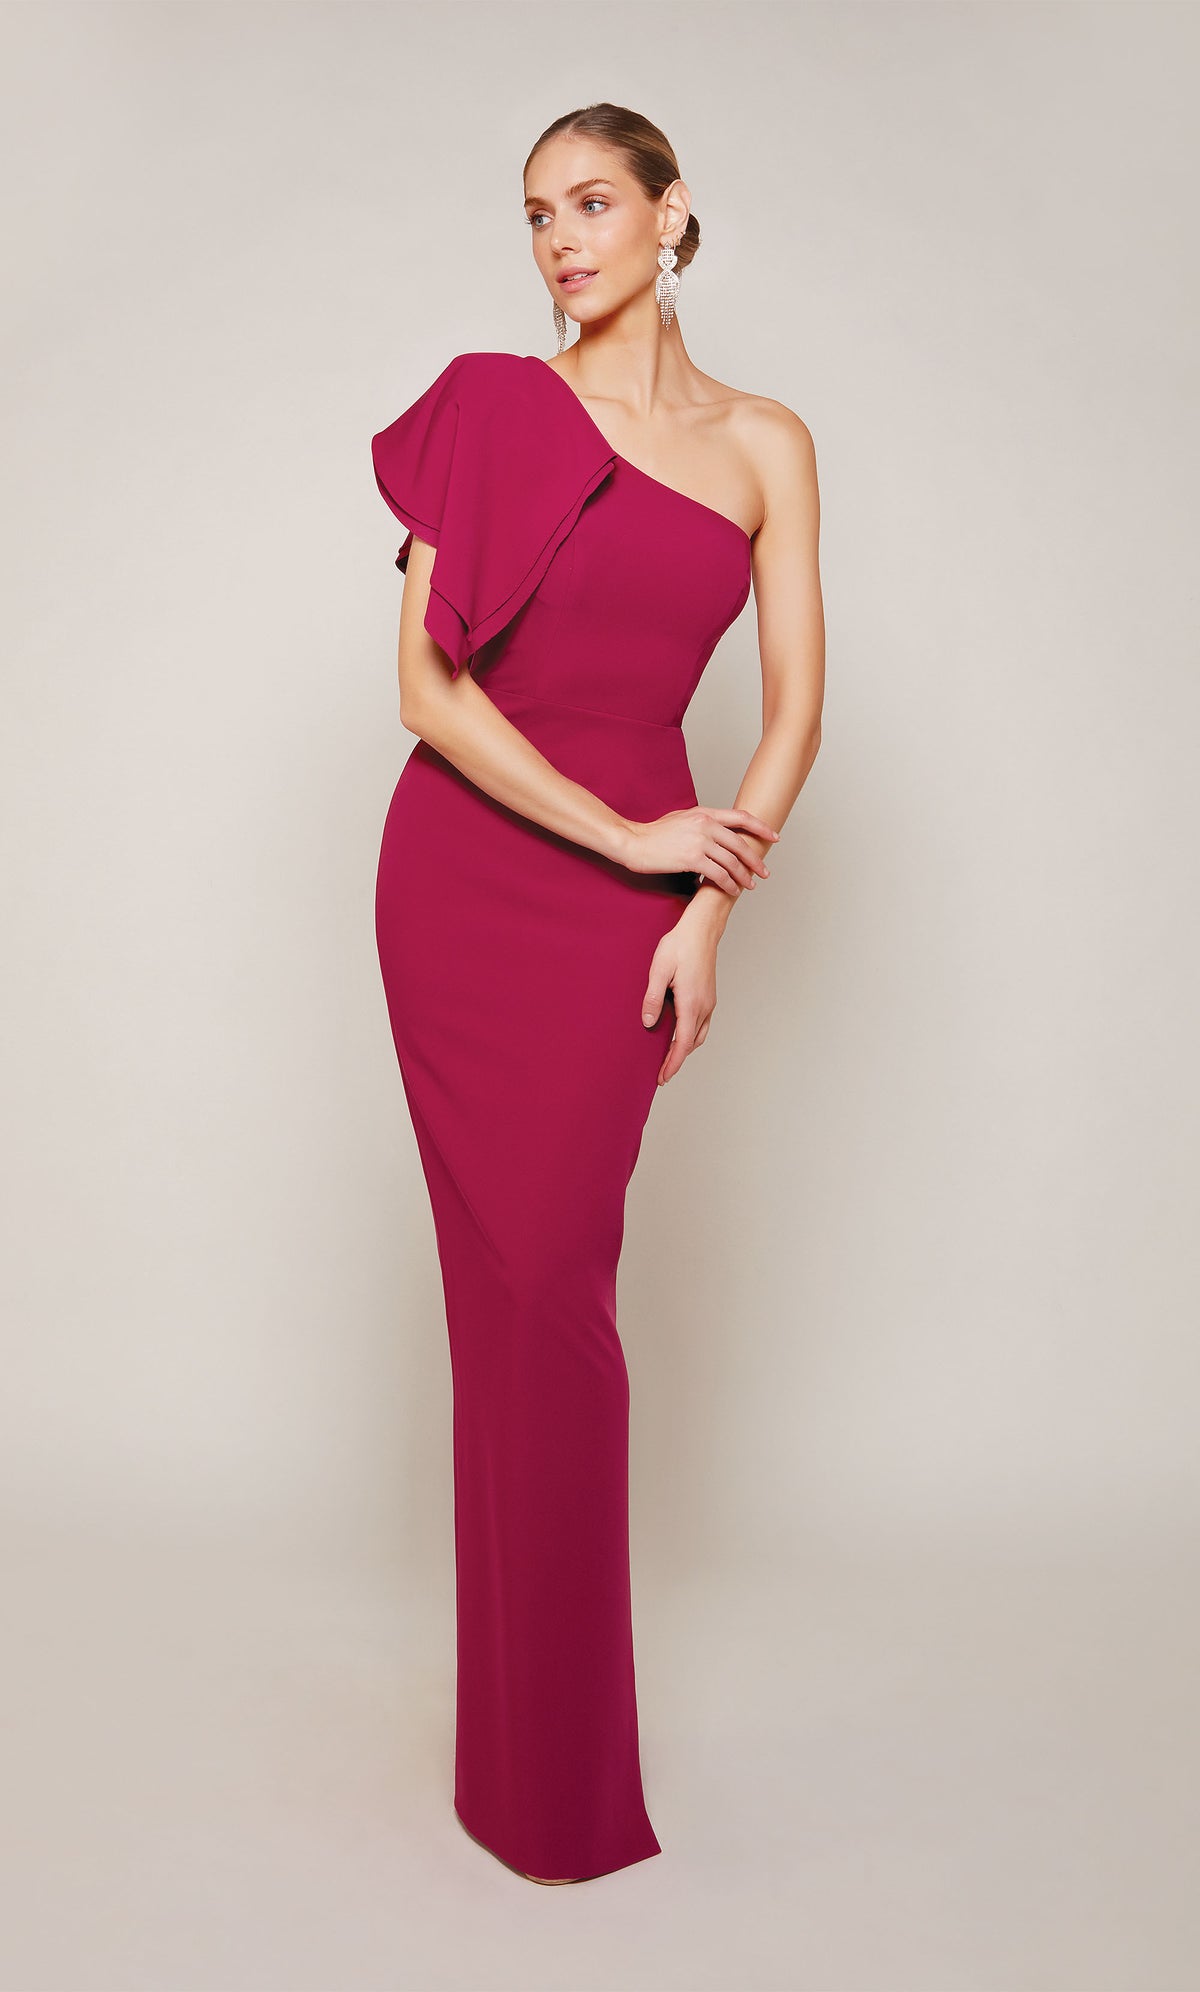 A sophisticated one-shoulder ruffle dress with a zip-up back and a gorgeous ruffle on the right shoulder in a vibrant red color called sparkling grape. This ALYCE Paris designer gown is perfect for a formal evening wedding or black tie event.